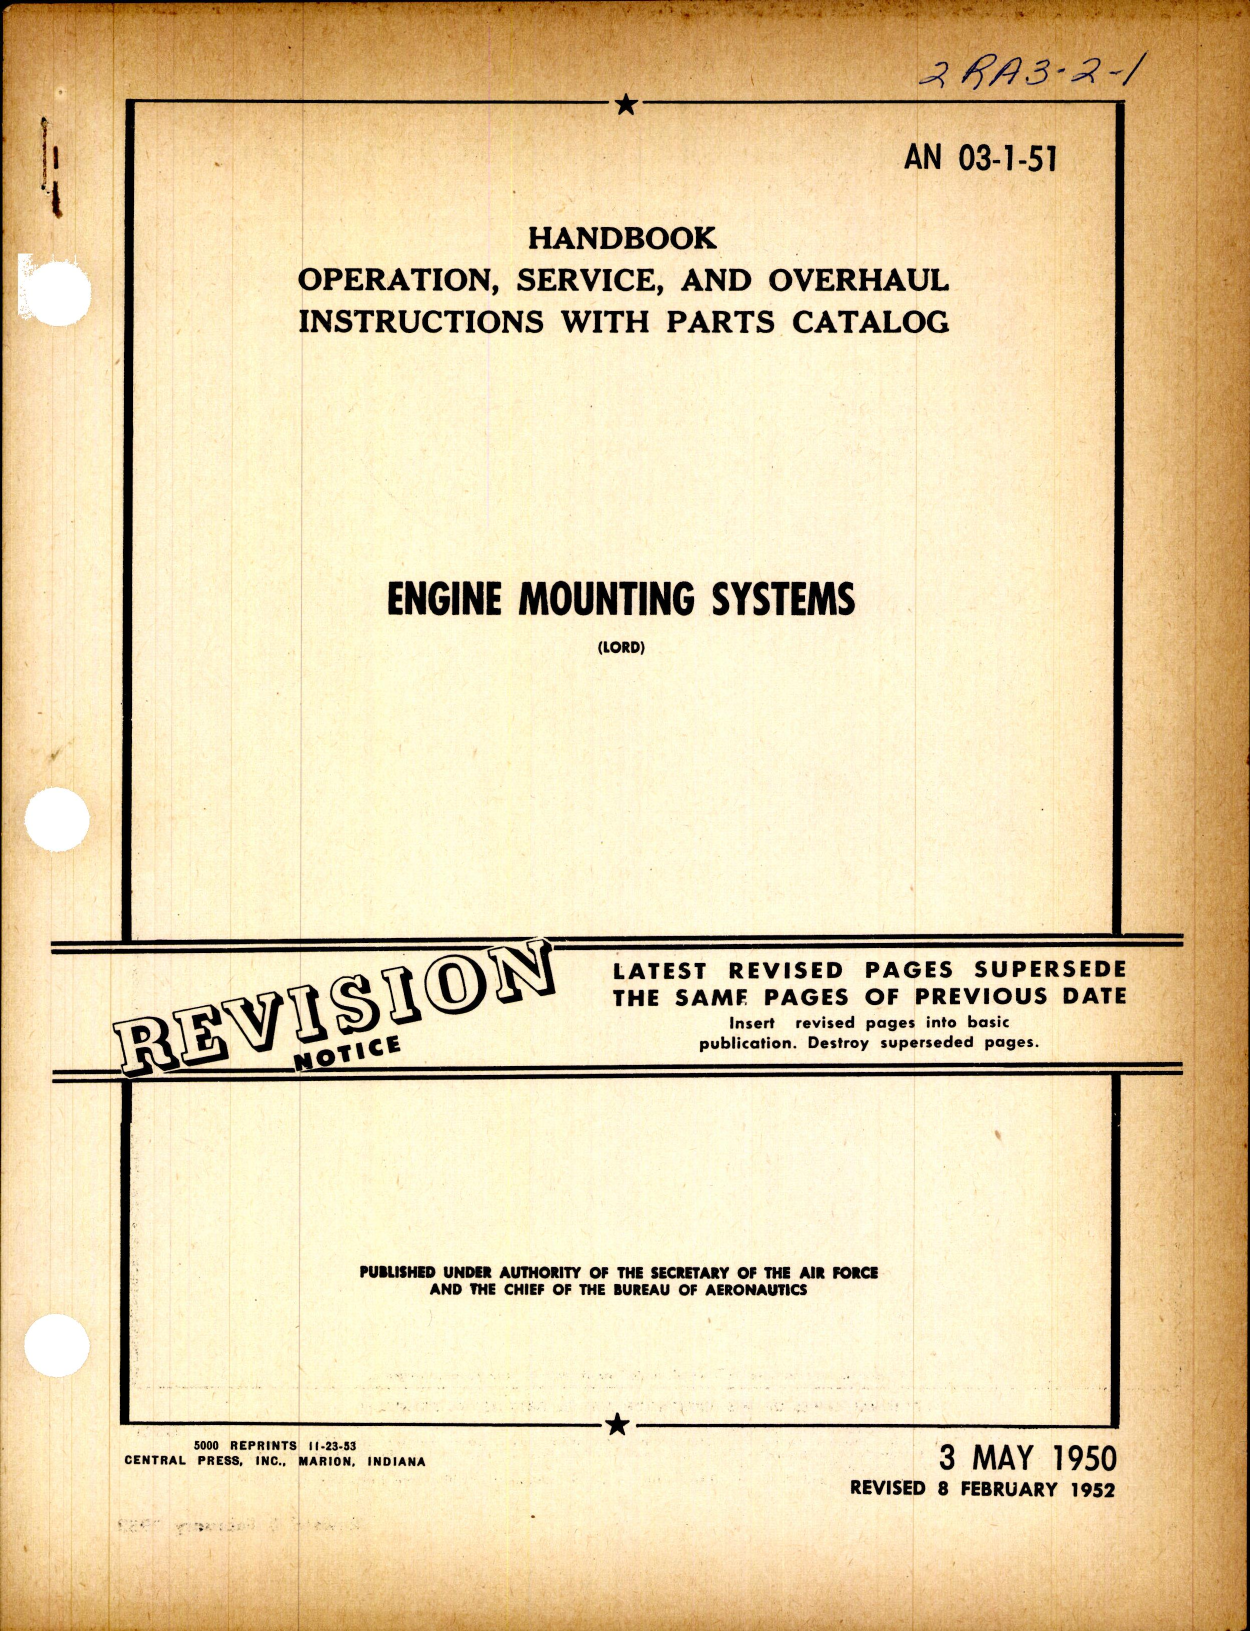 Sample page 1 from AirCorps Library document: Operation, Service, and Overhaul Instructions with Parts Catalog for Engine Mounting Systems